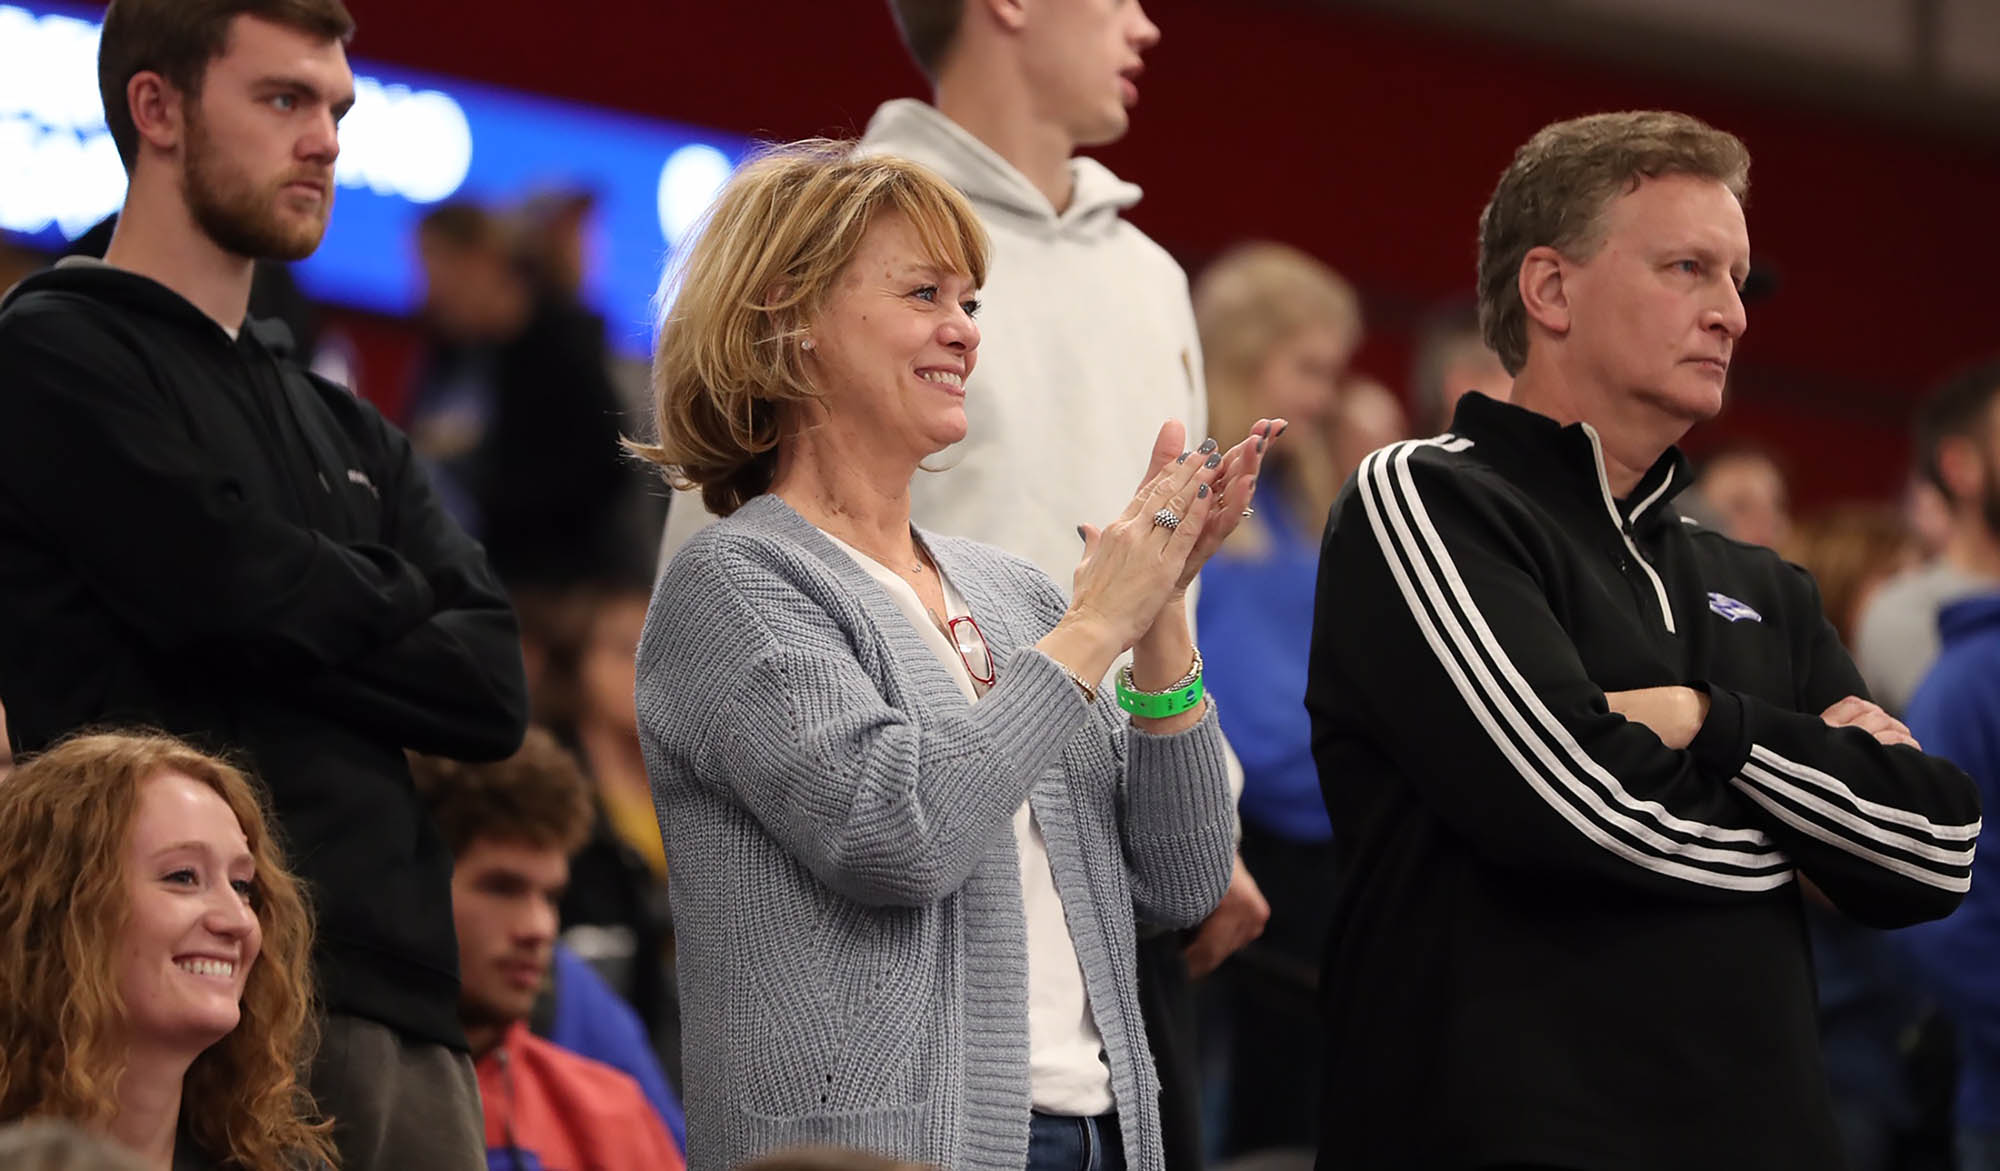 Cindy Wolfe of Omaha, the mother of junior outside hitter Mary Katherine Wolfe, cheers on the Lopers during Saturday’s NCAA Division II women’s volleyball championship at the Auraria Event Center in Denver. “I don’t know how to describe it,” Cindy Wolfe said of the experience. “In the back of your mind you knew they could do it, but to actually be here is another thing. There are really no words, but I’m so excited for them.” (Photos by Corbey R. Dorsey, UNK Communications)